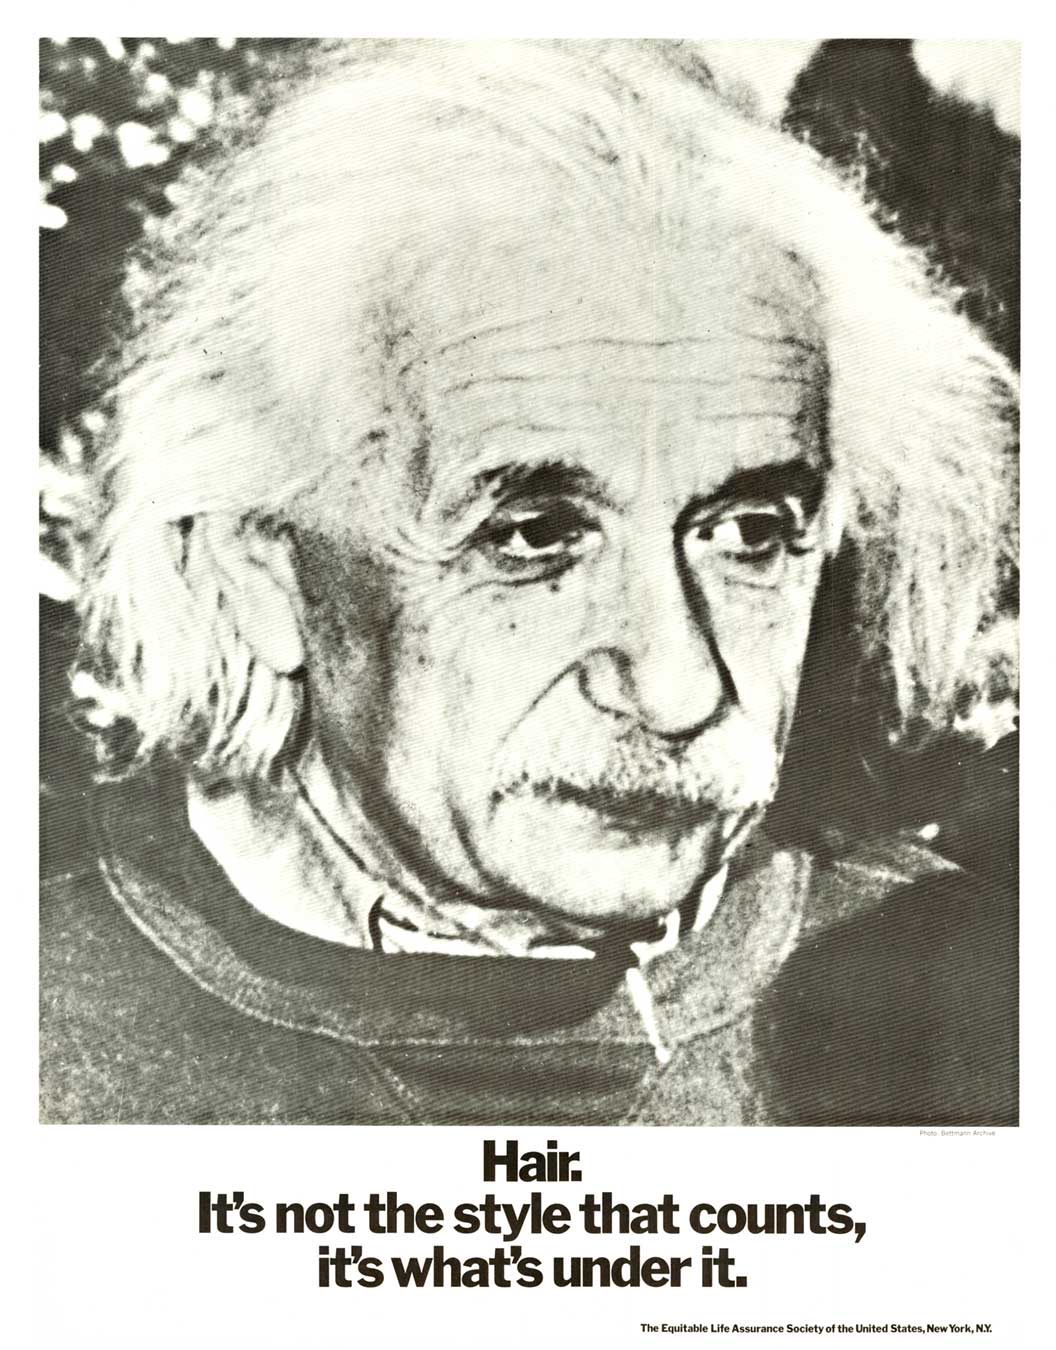 Original Einstein vintage poster. “Hair. It’s not the style that counts, it’s what’s under it.” <br> <br>From a series of portraits with inspirational quotes from The Equitable Life Assurance Society of the United States. Photo from Bettmann Archive.